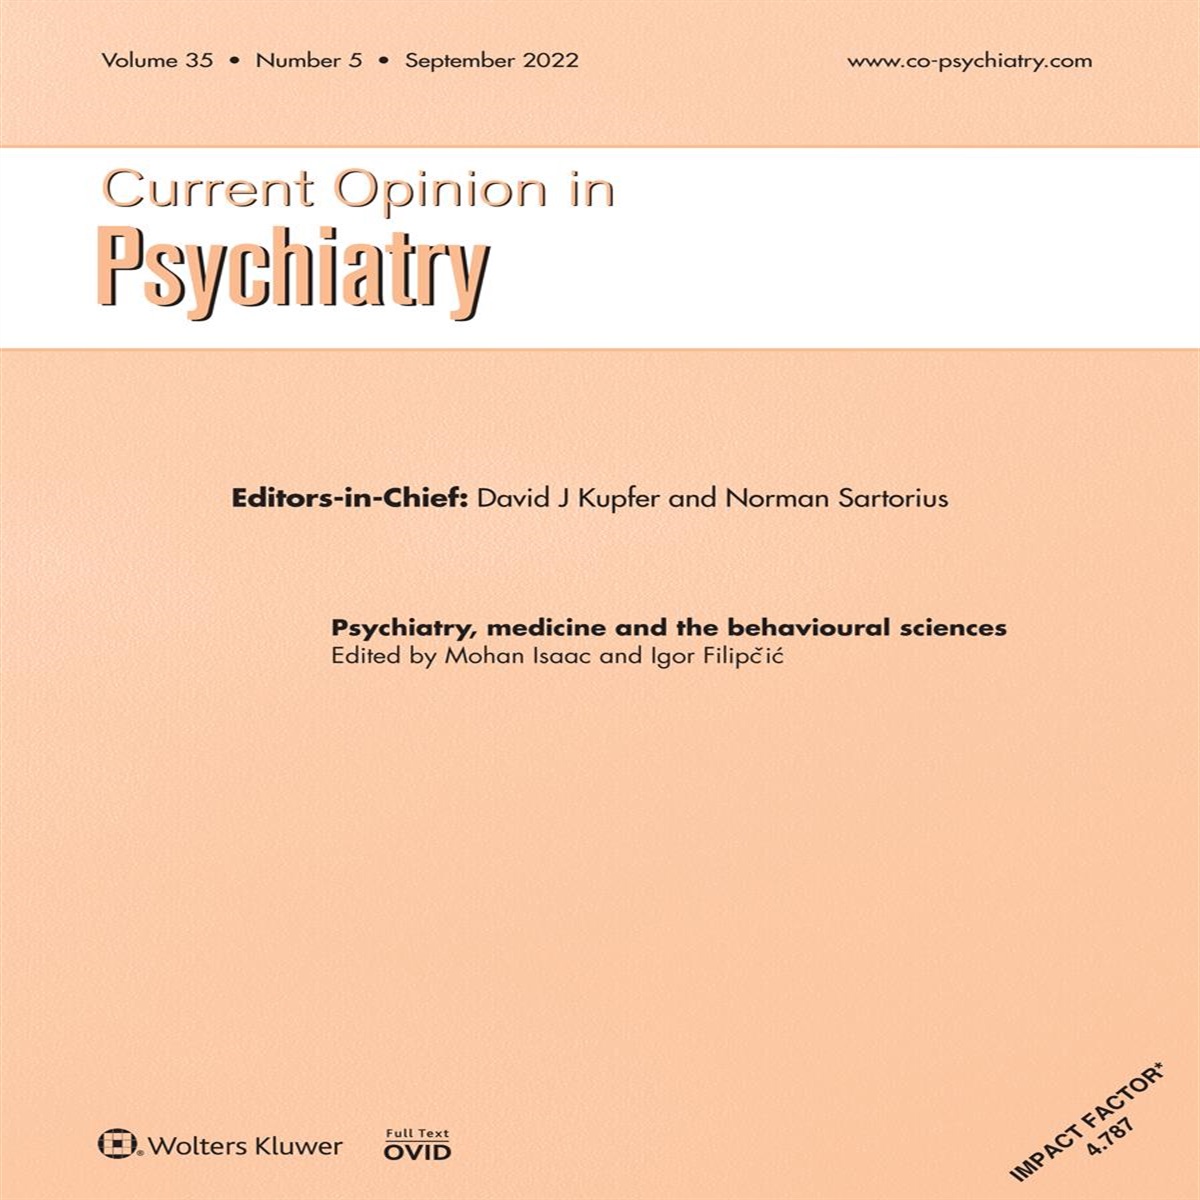 Editorial: The mental health in post-COVID-19 era: challenges and consequences